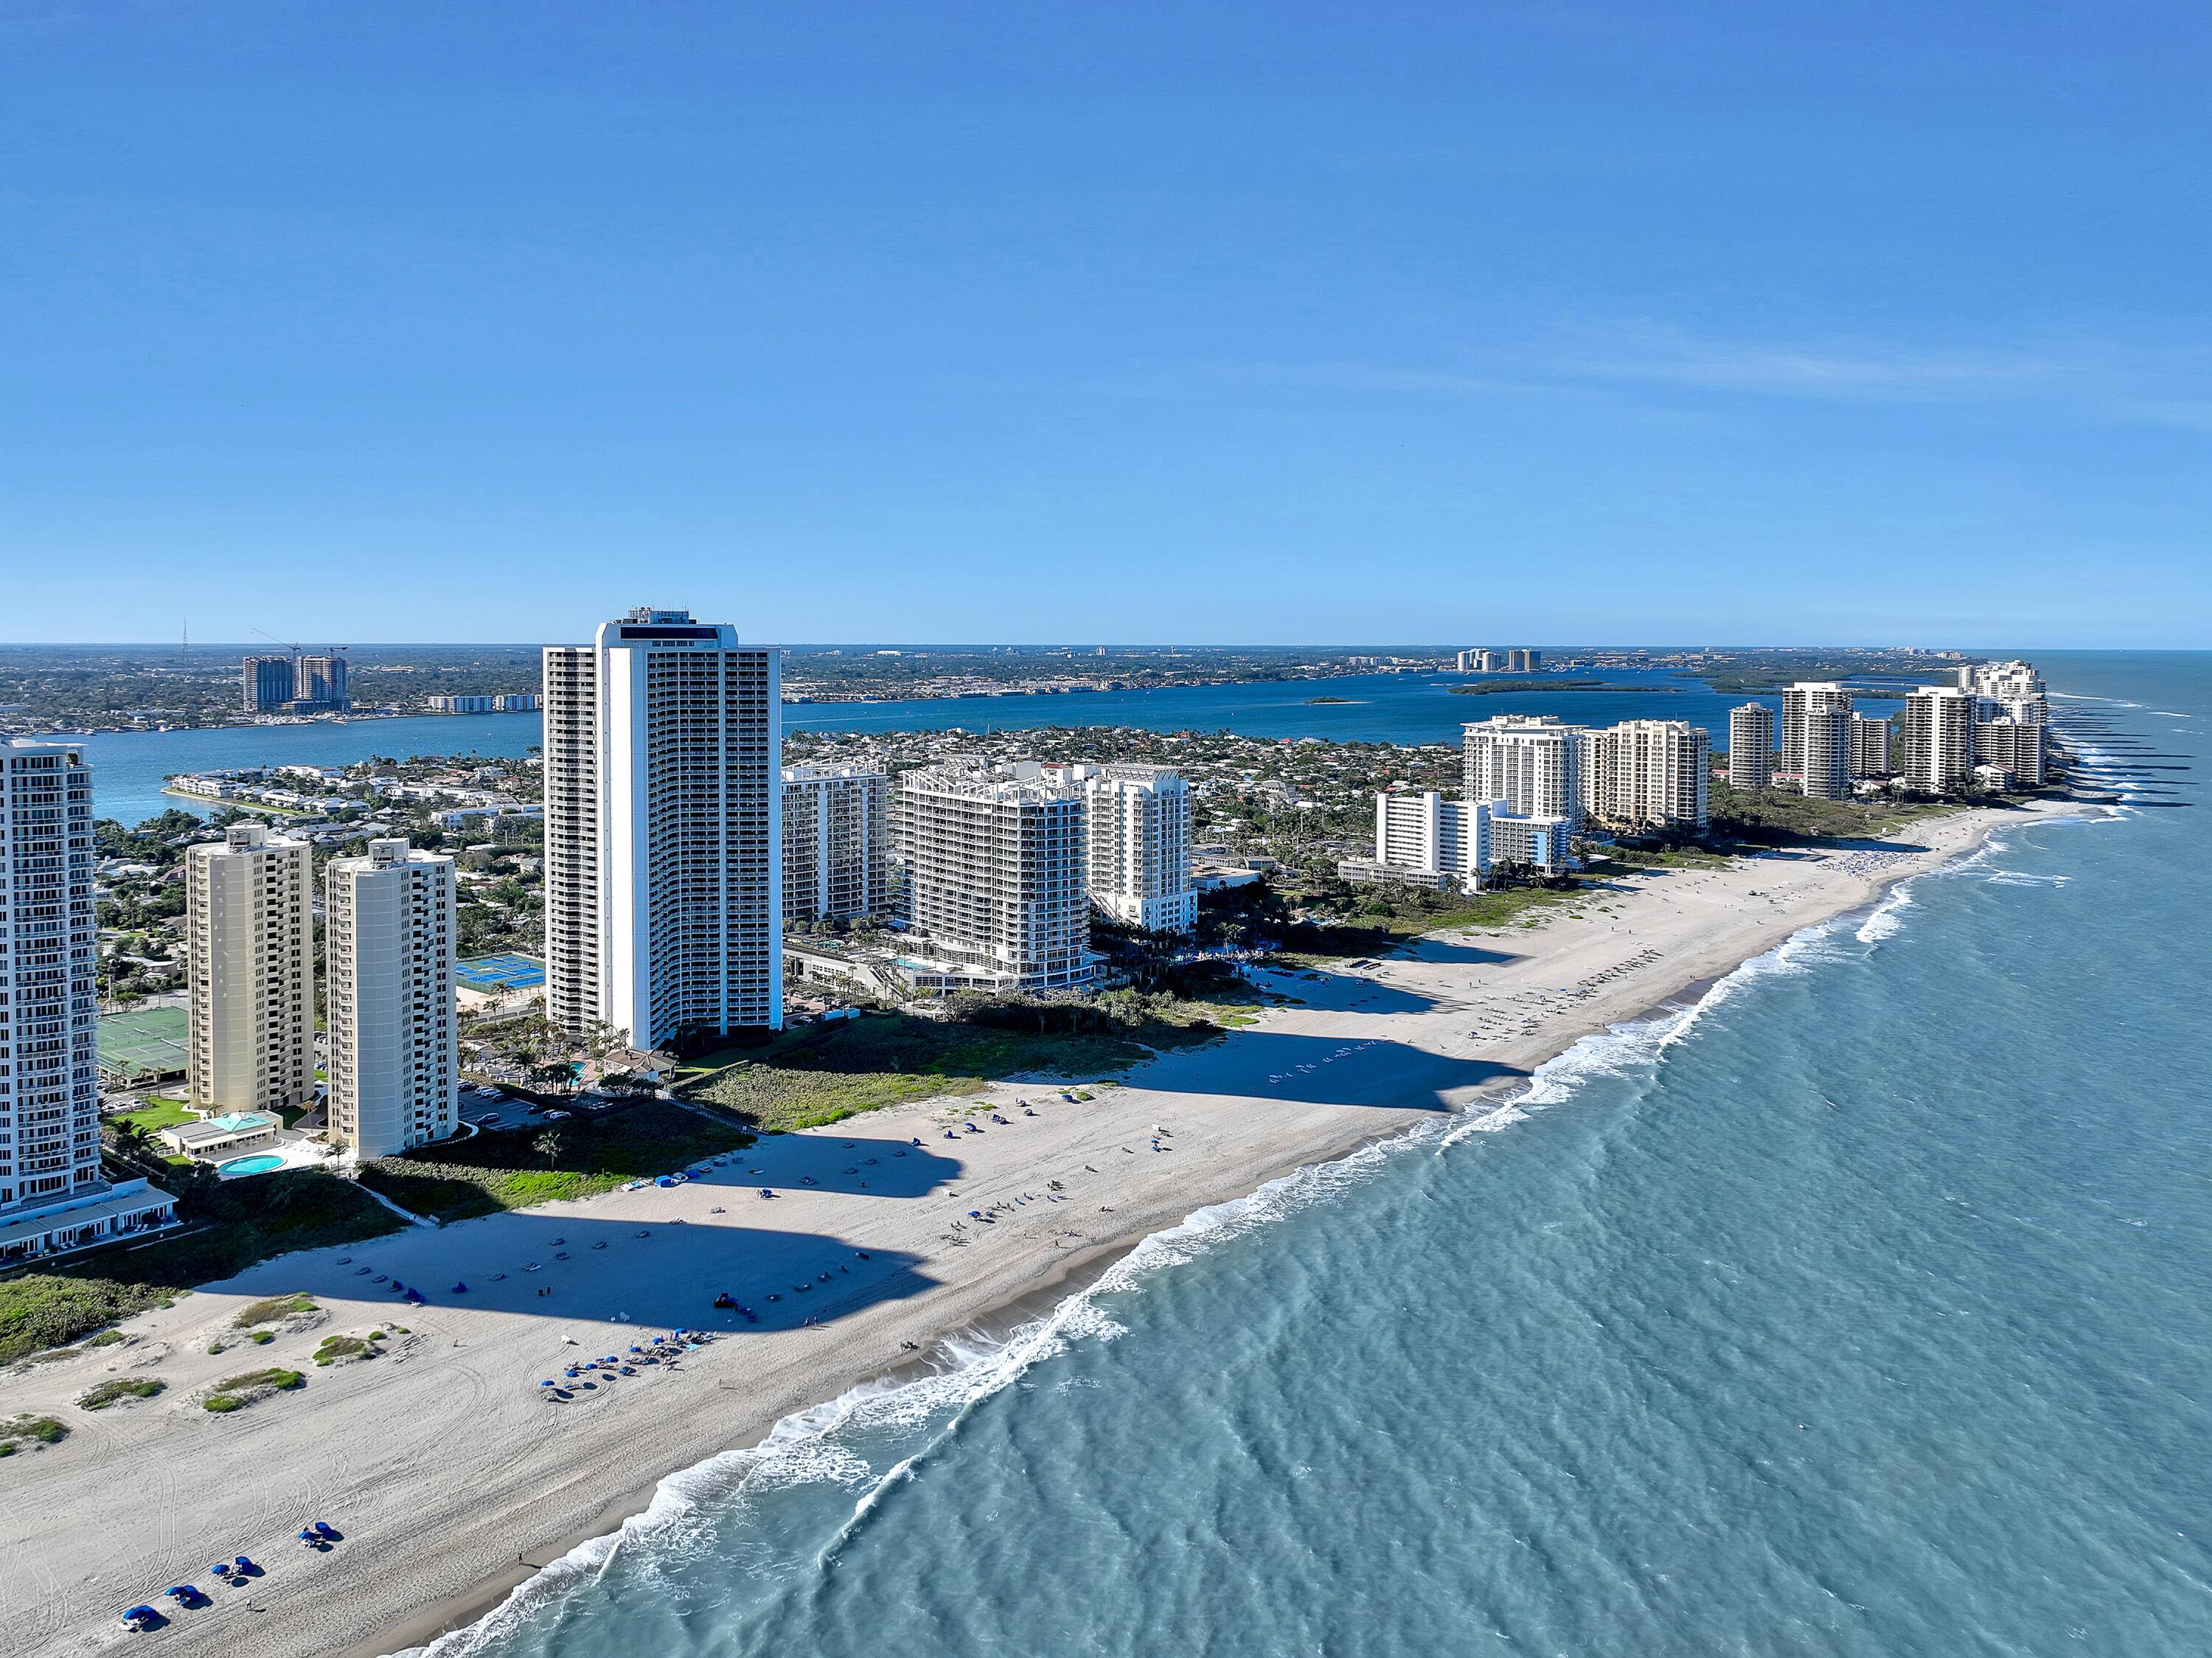 Singer Island. Do not miss this opportunity to live near the beach and enjoy the island lifestyle.